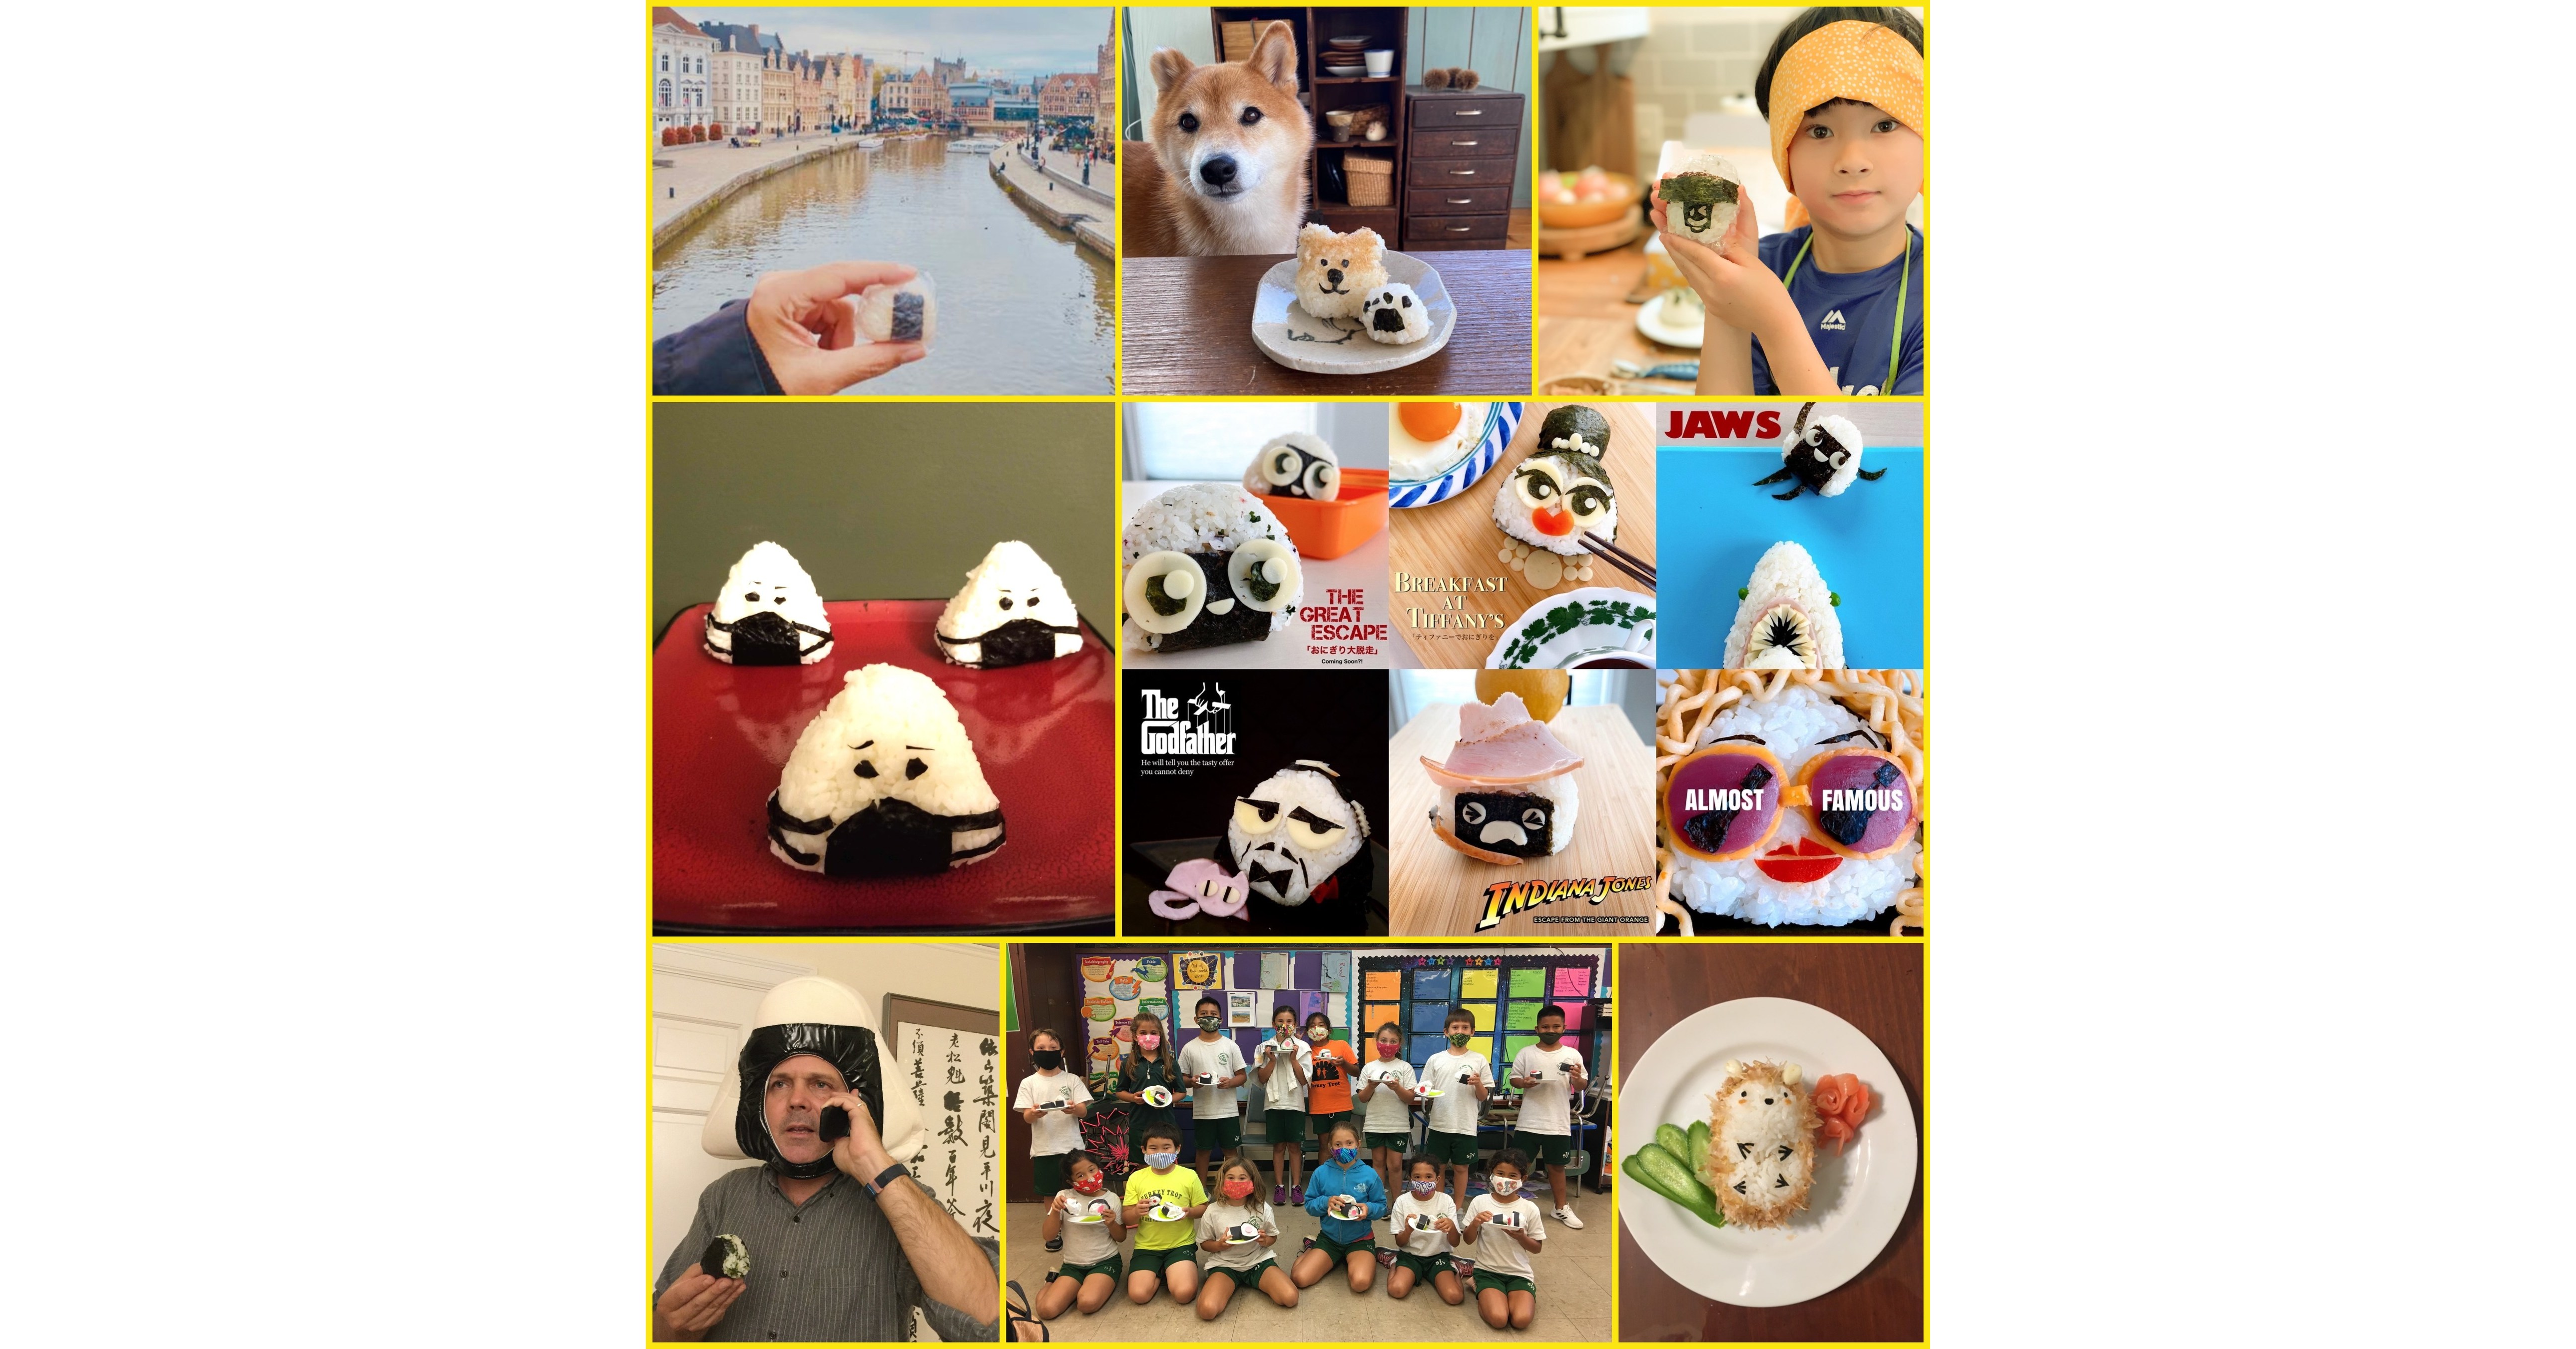 table for two's onigiri action campaign provides 900,000 school meals with 200,000 'onigiri' rice ball photo posts in 31 days